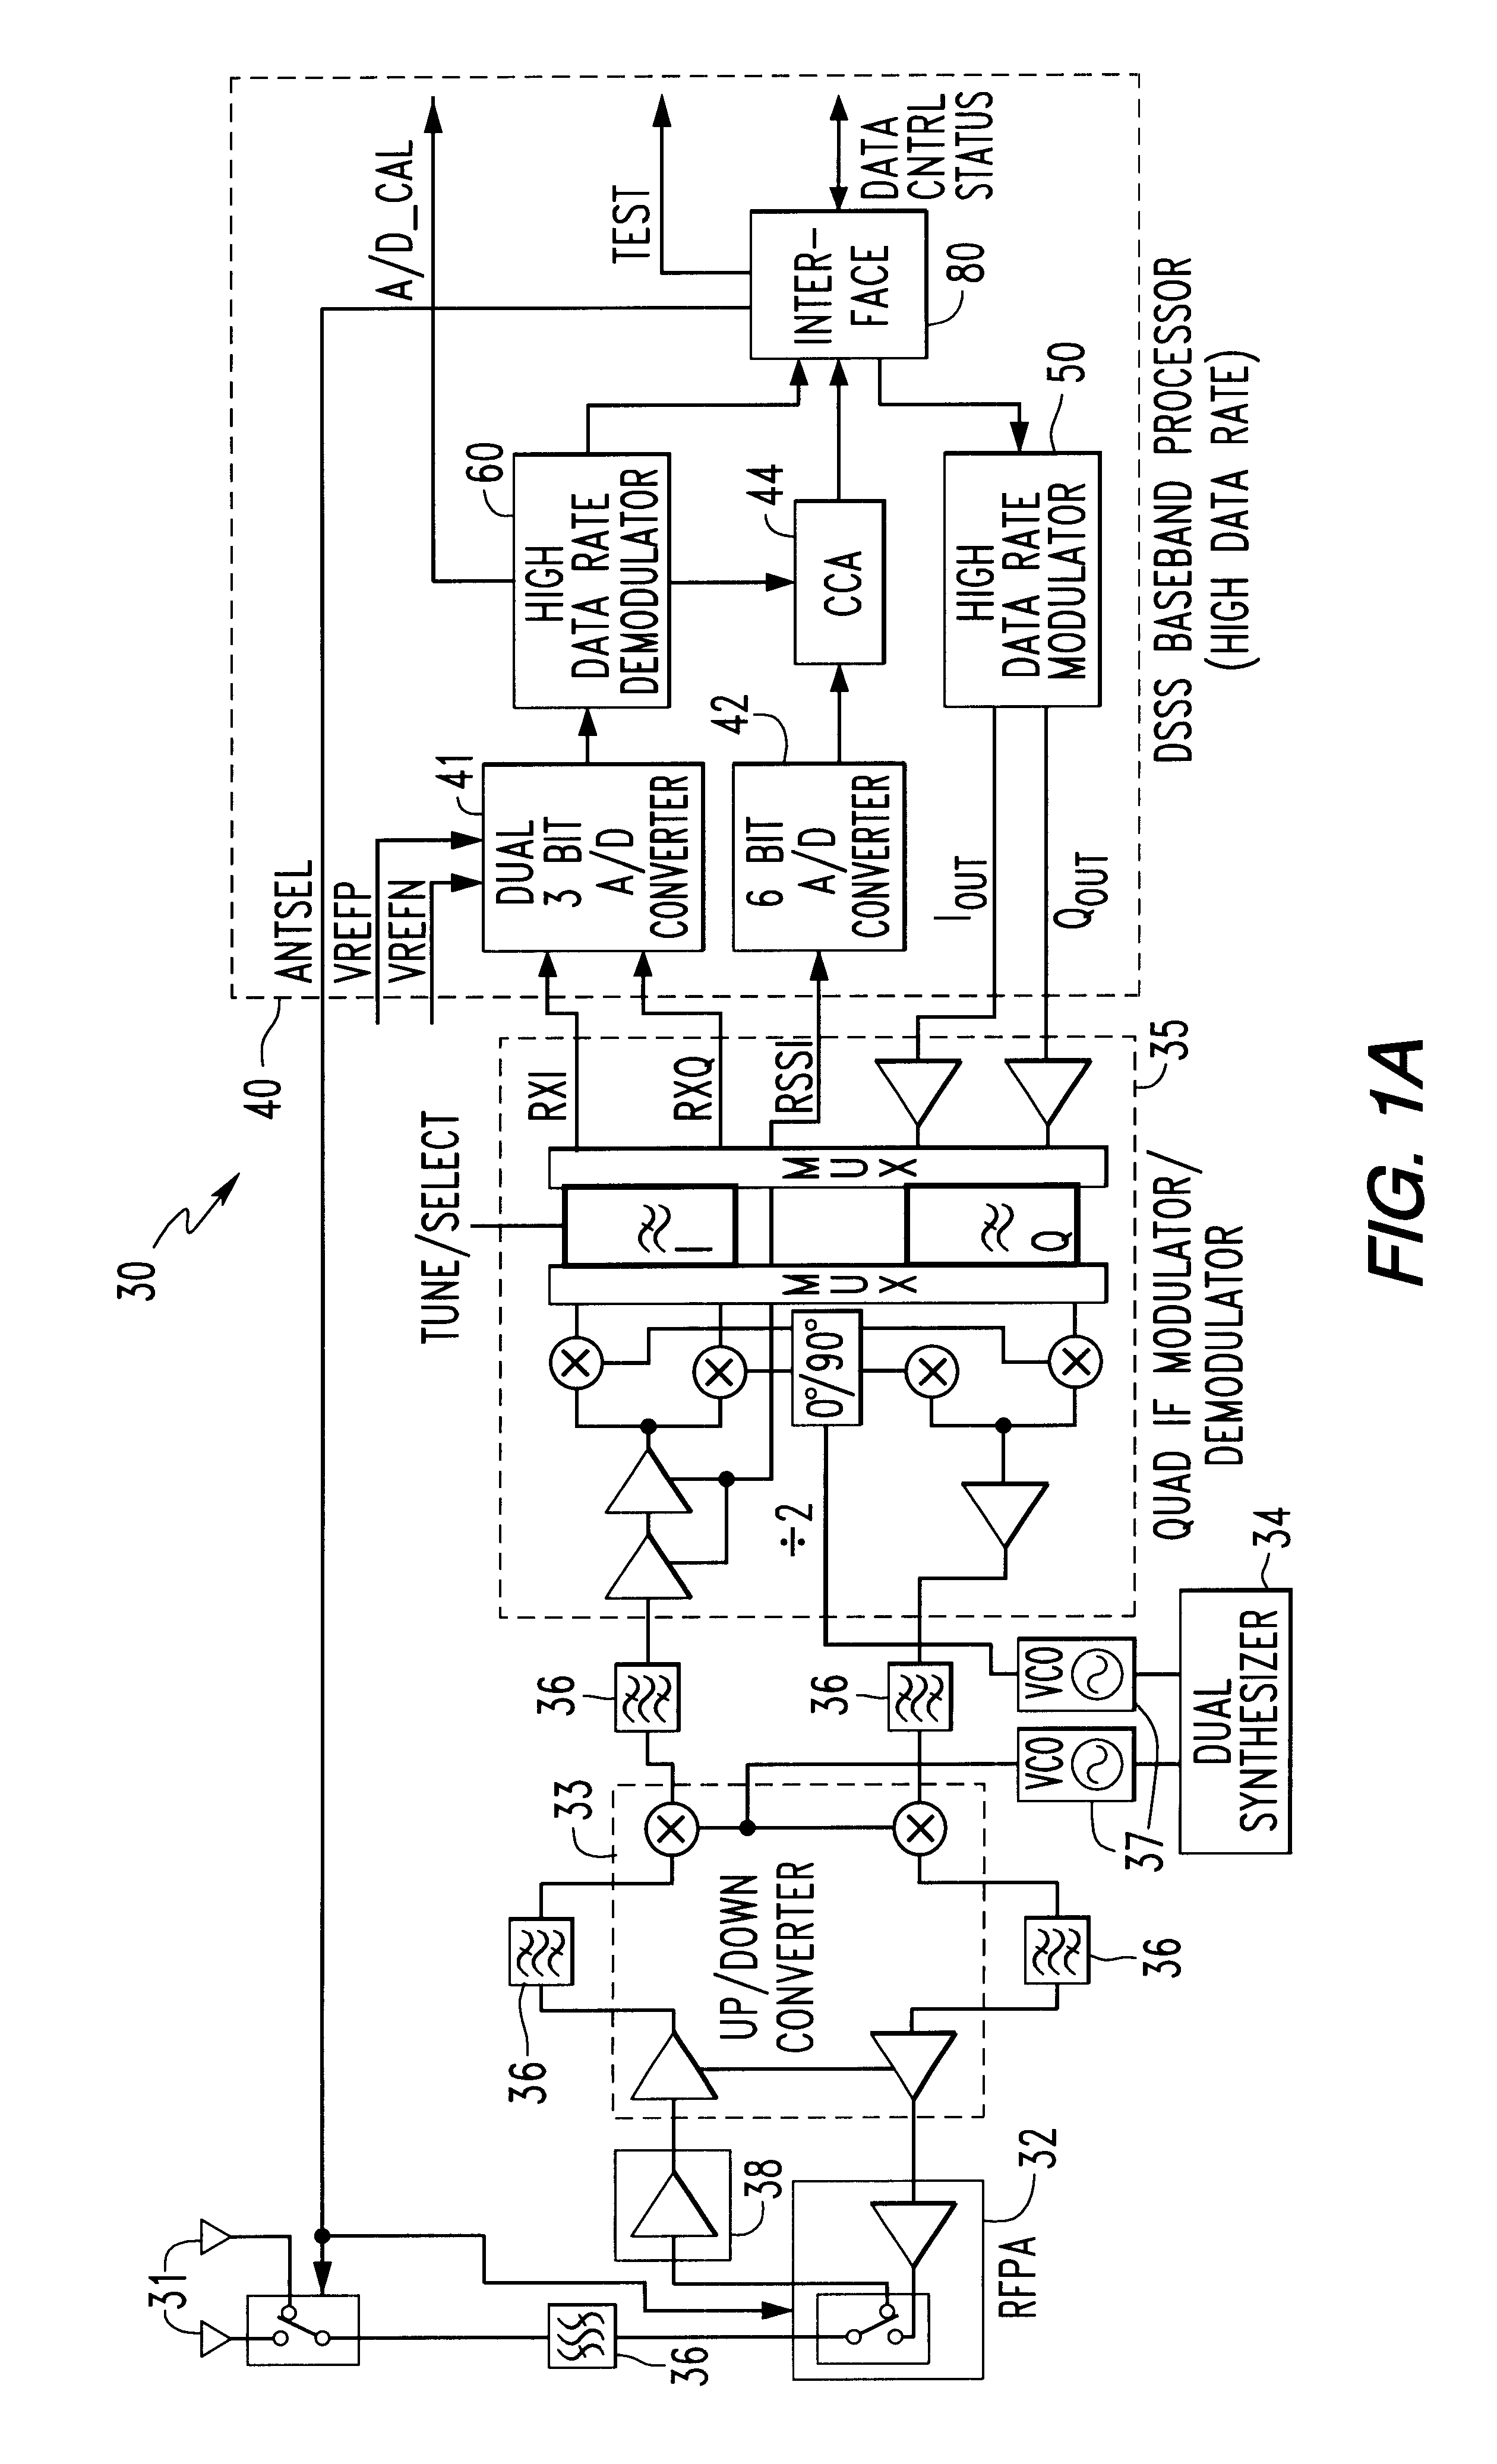 Spread spectrum transceiver for use in wireless local area network and having multipath mitigation